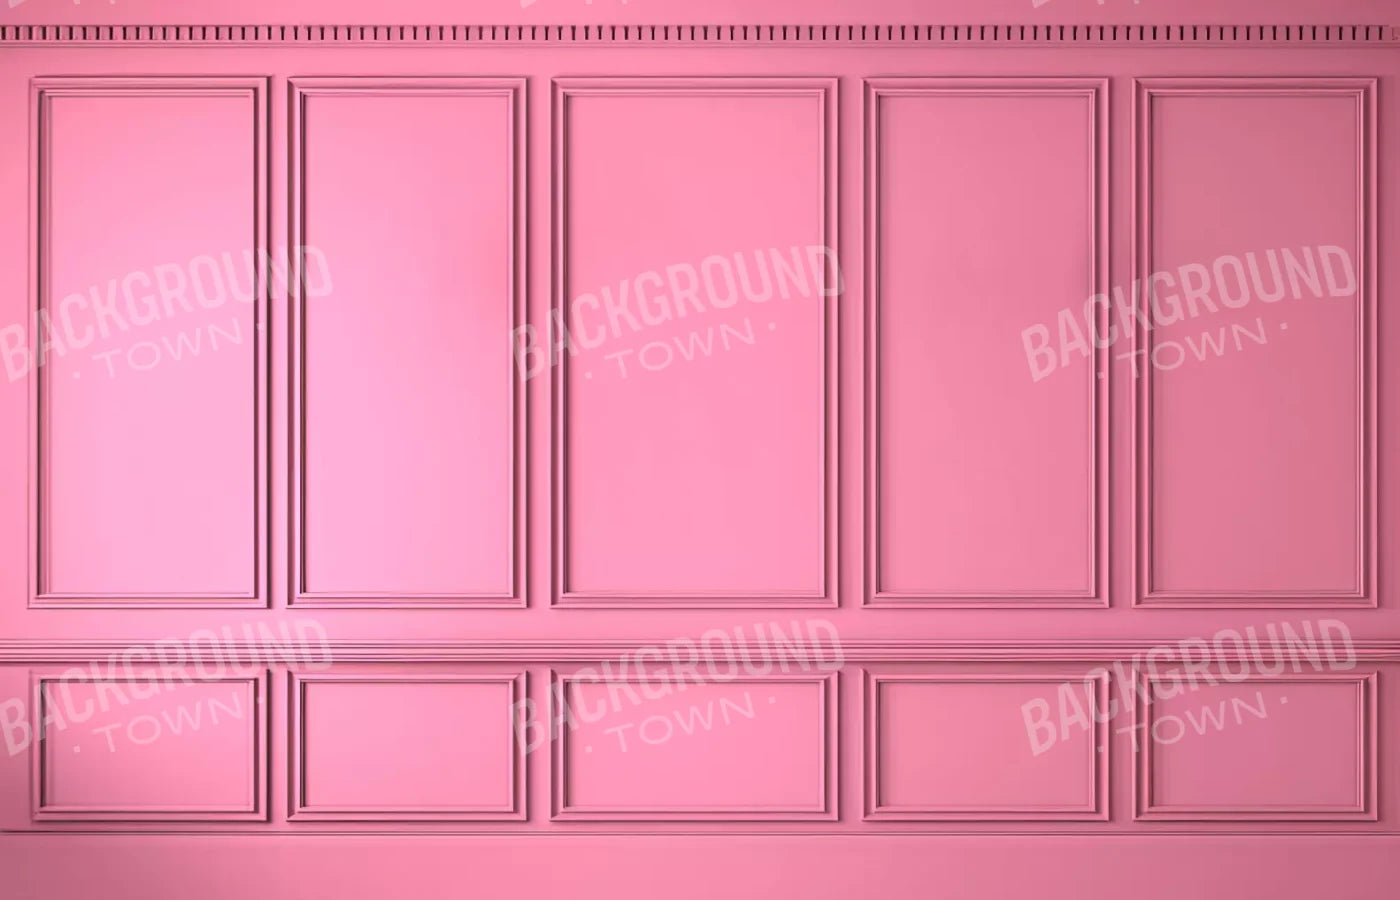 Carrie Pink 3 14’X9’ Ultracloth (168 X 108 Inch) Backdrop